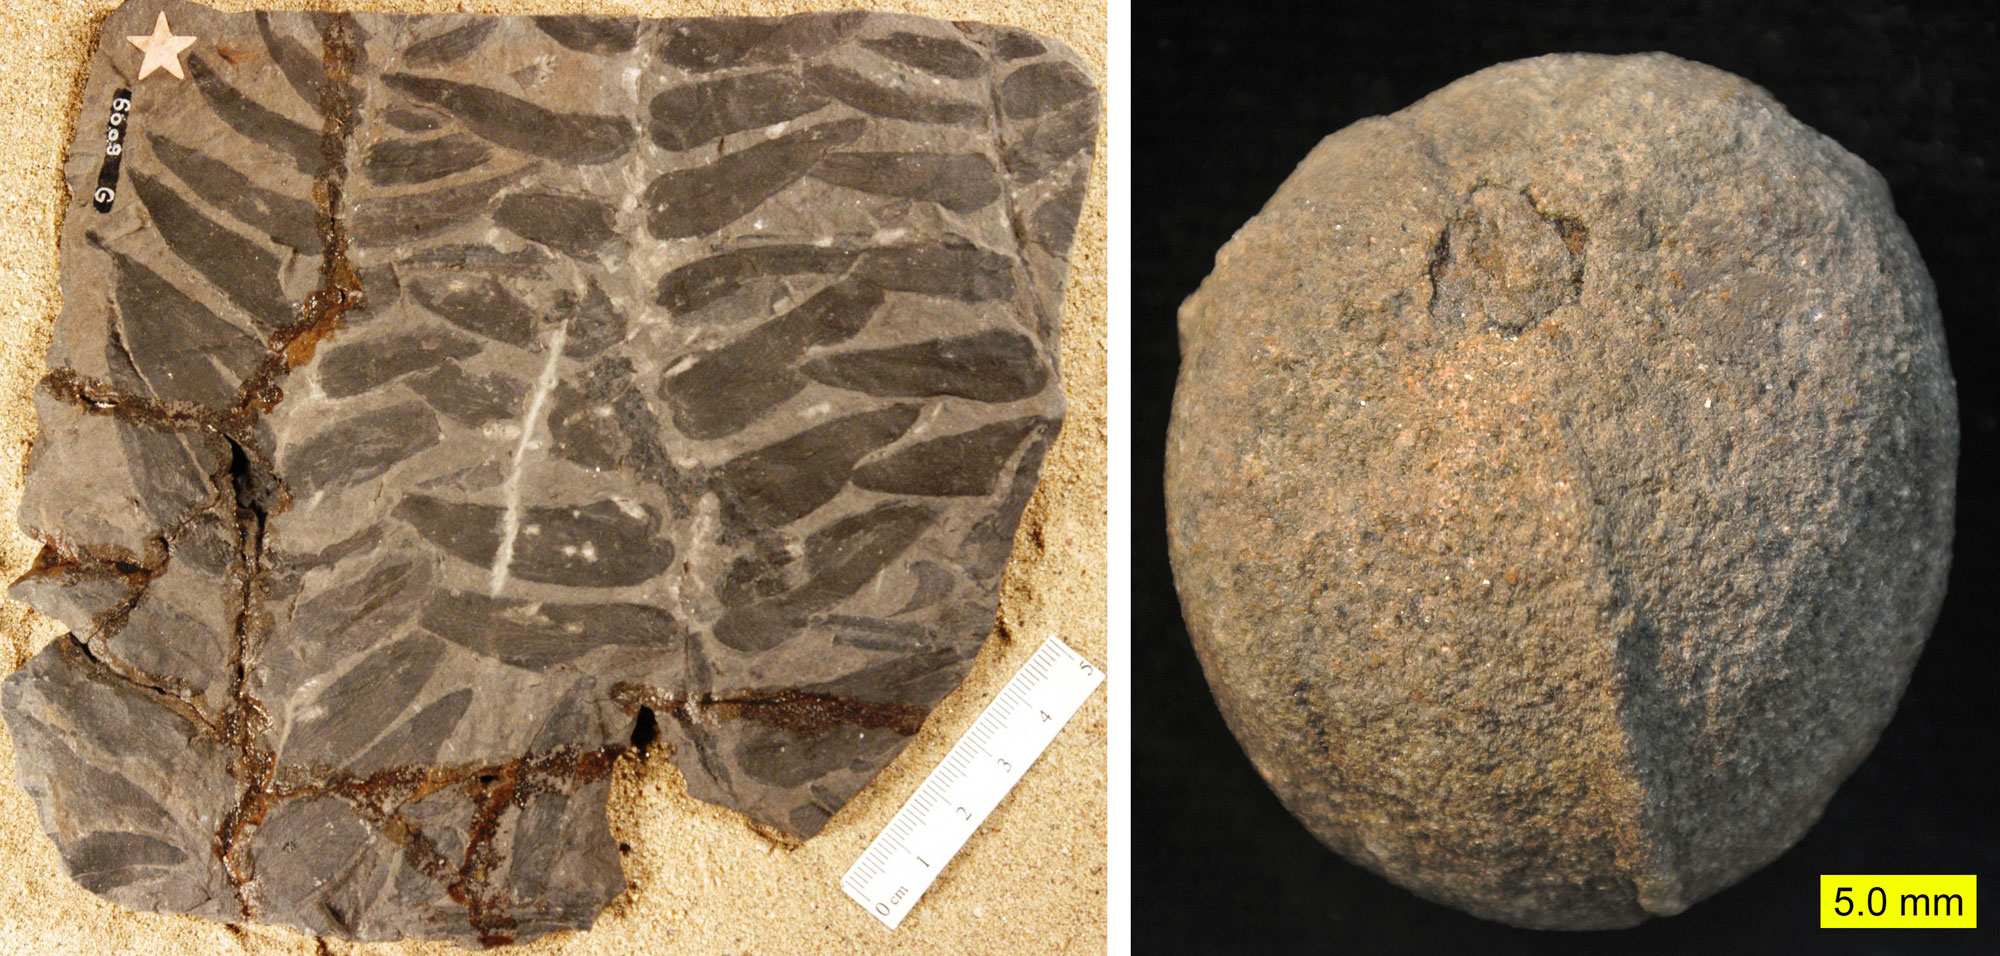 2-Panel figure made up of photographs of seed fern structures from the Carboniferous of Ohio. Panel 1: Photo of Neuropteris leaves. The photo shows a brown rock with three partial Neuropteris fronds preserved on the surface. The frond segments each have a central axis and lateral pinnae. Panel 2: Photo of Trigonocarpus, a seed. The photo shows a spherical seed with two prominent vertical ridges and a central depression at one end.